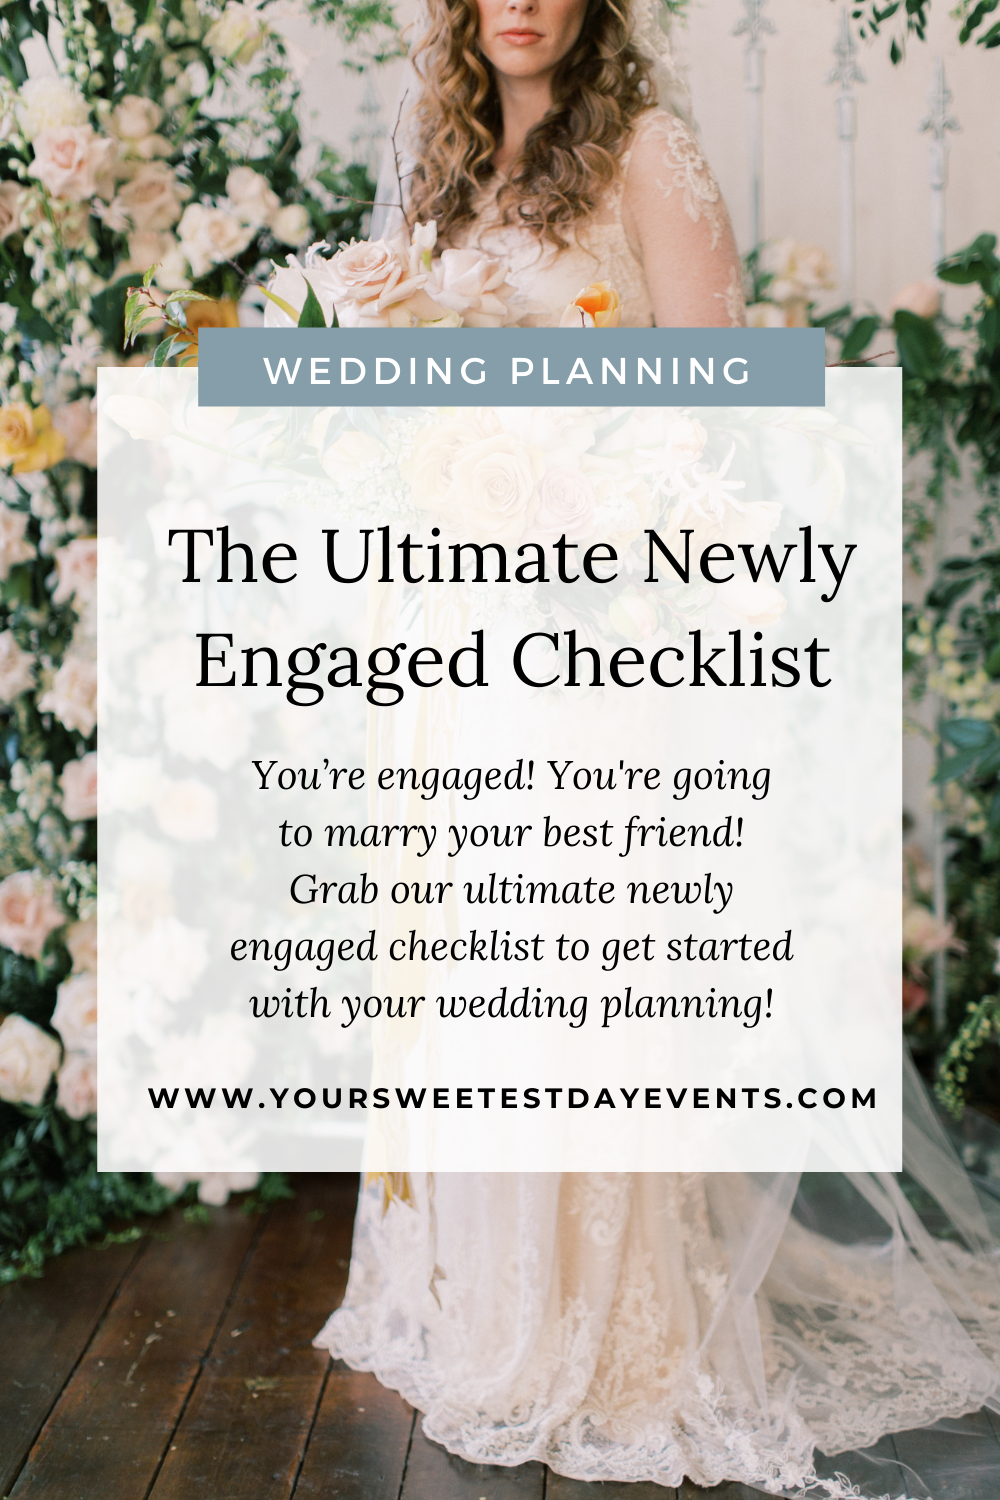 The Ultimate Newly Engaged Checklist